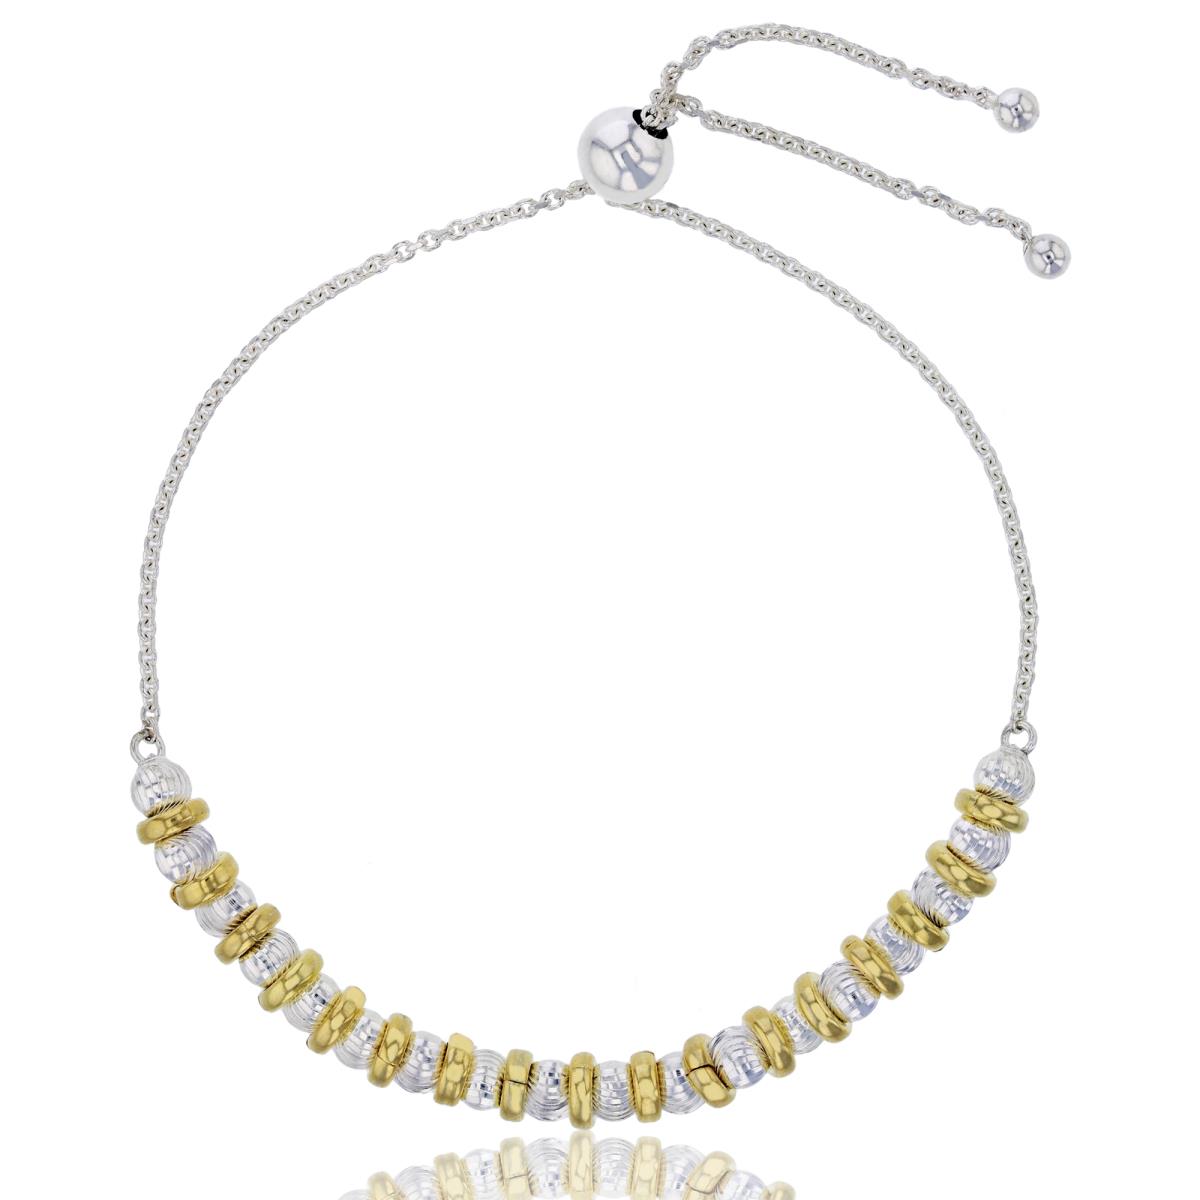 Sterling Silver Yellow & White Alternating Moon Cut Beads & Polished Disc Adjustable Bracelet